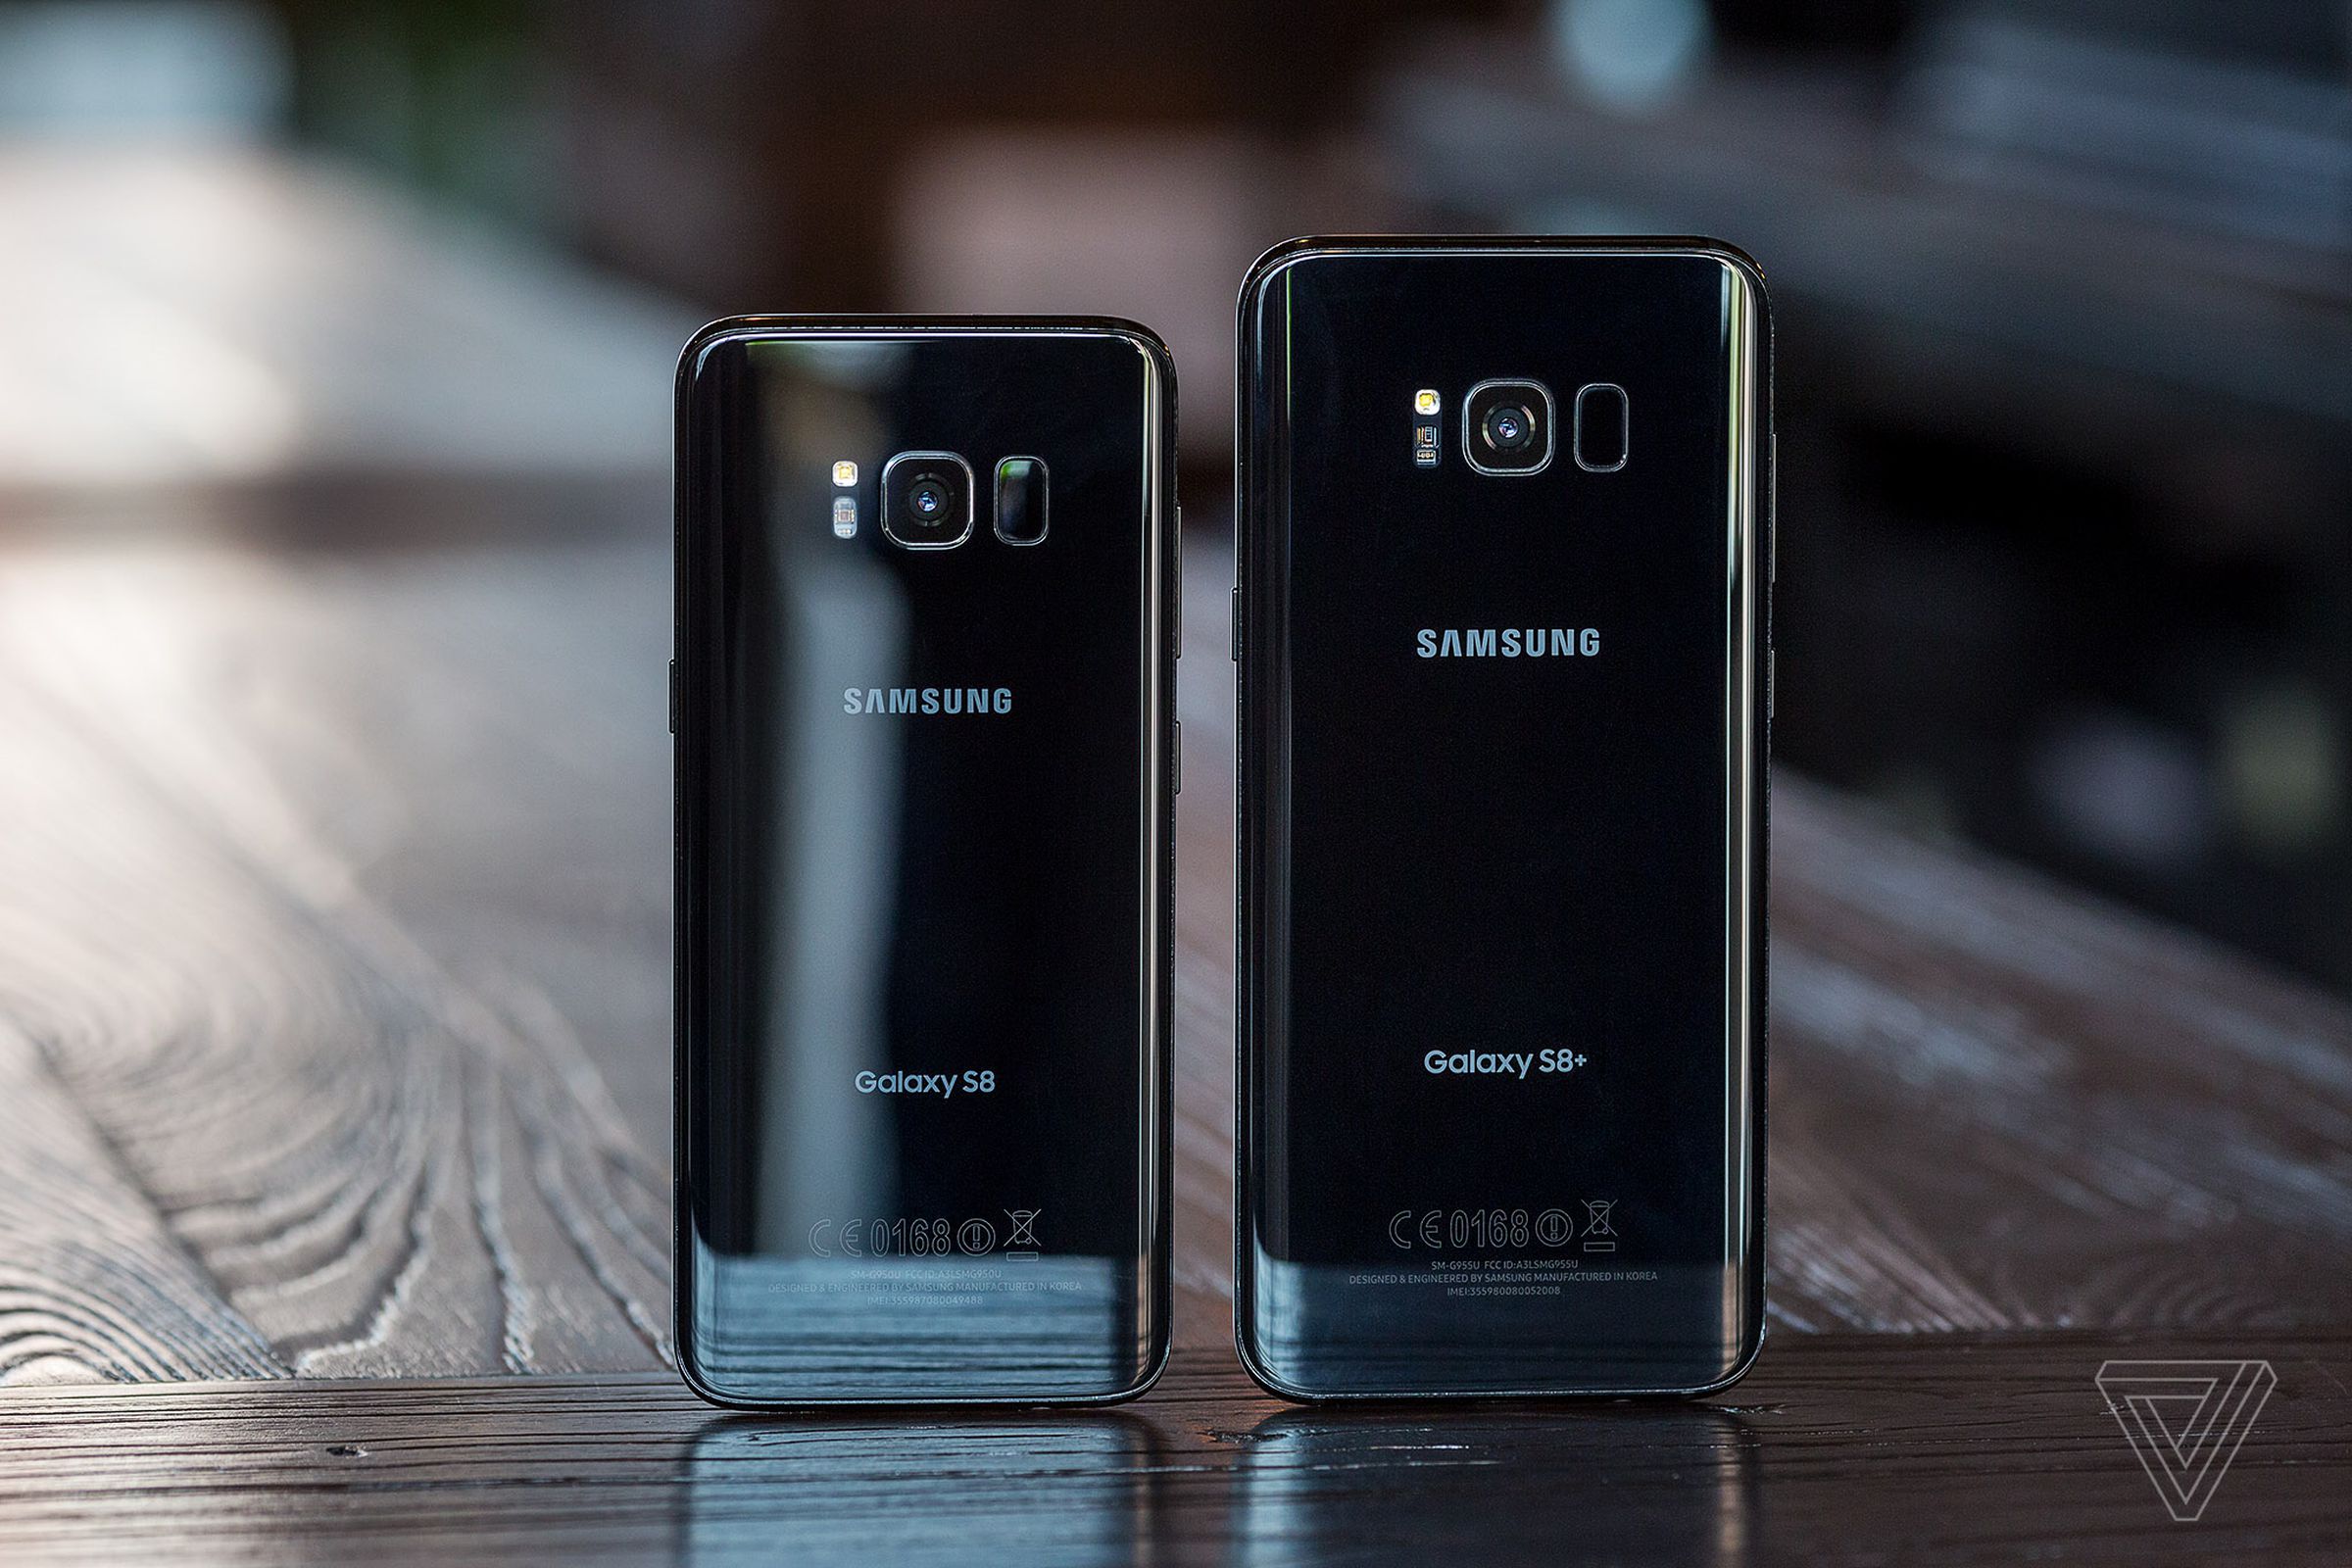 Samsung Galaxy S8 and Galaxy S8 Plus rear view